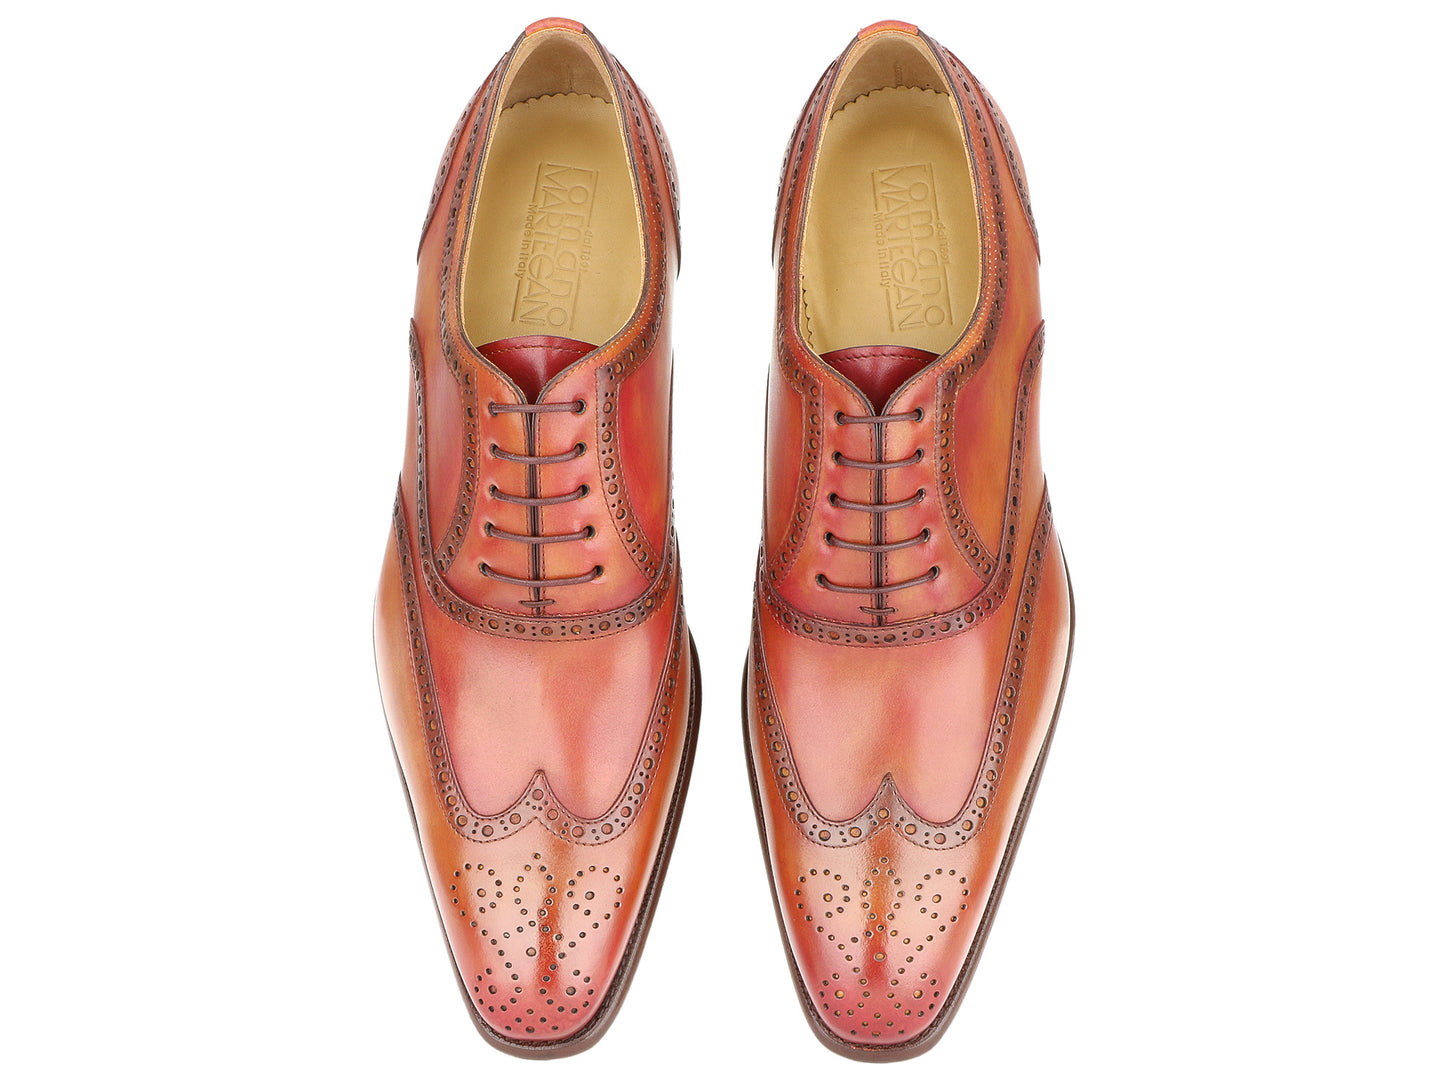 FEDERICO - Iron red Leather Oxford